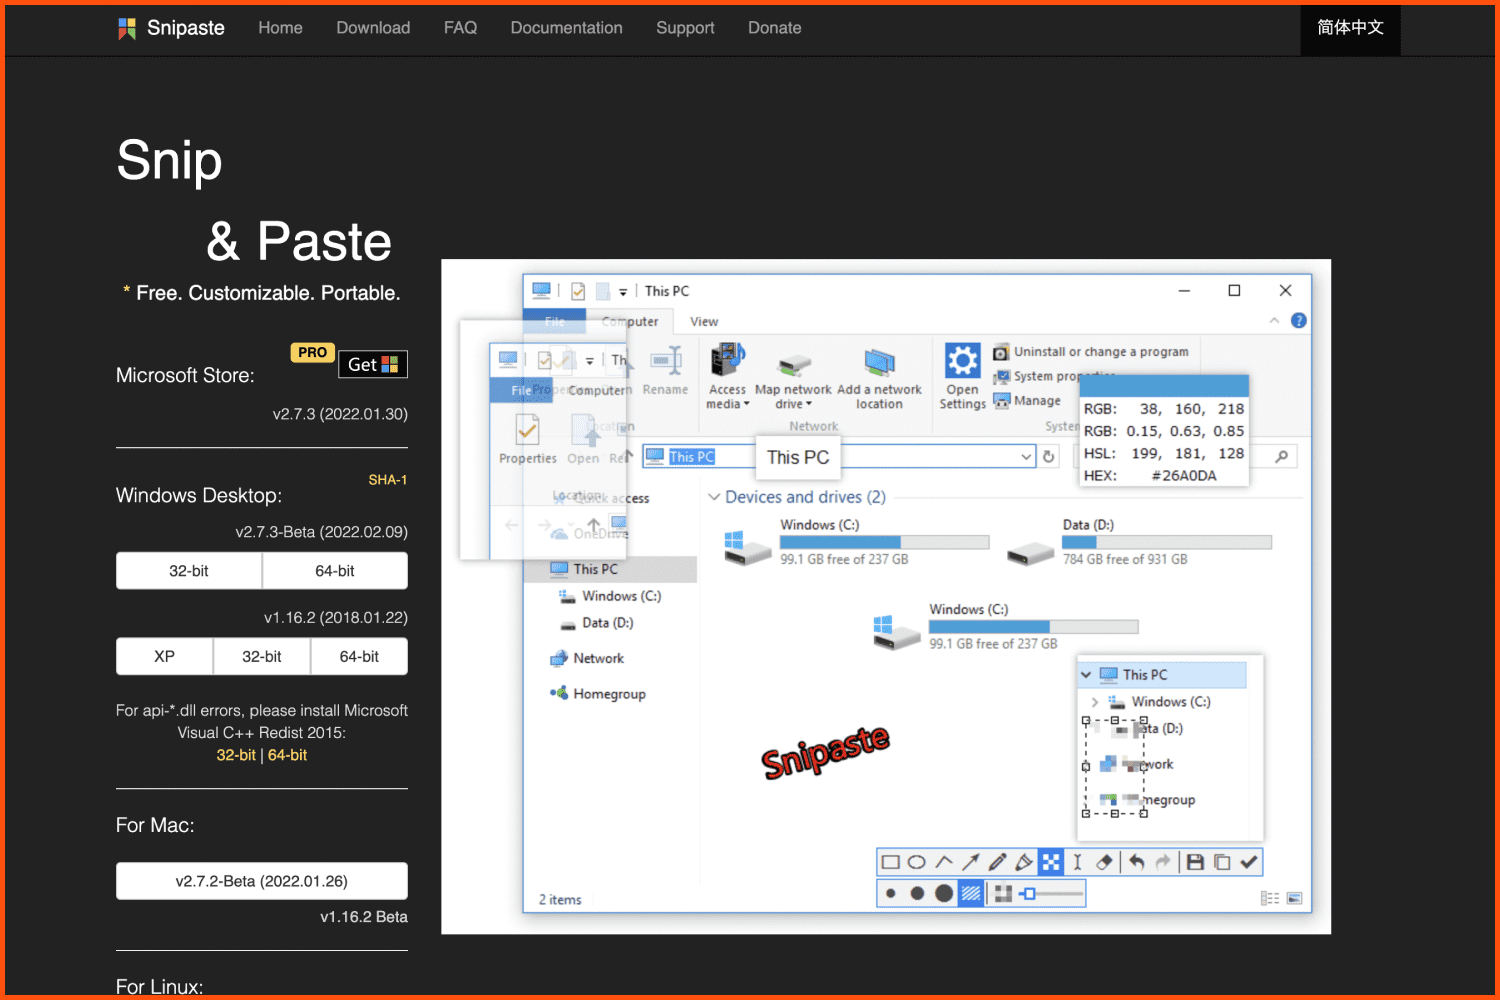 Screenshot of Snipaste home page.